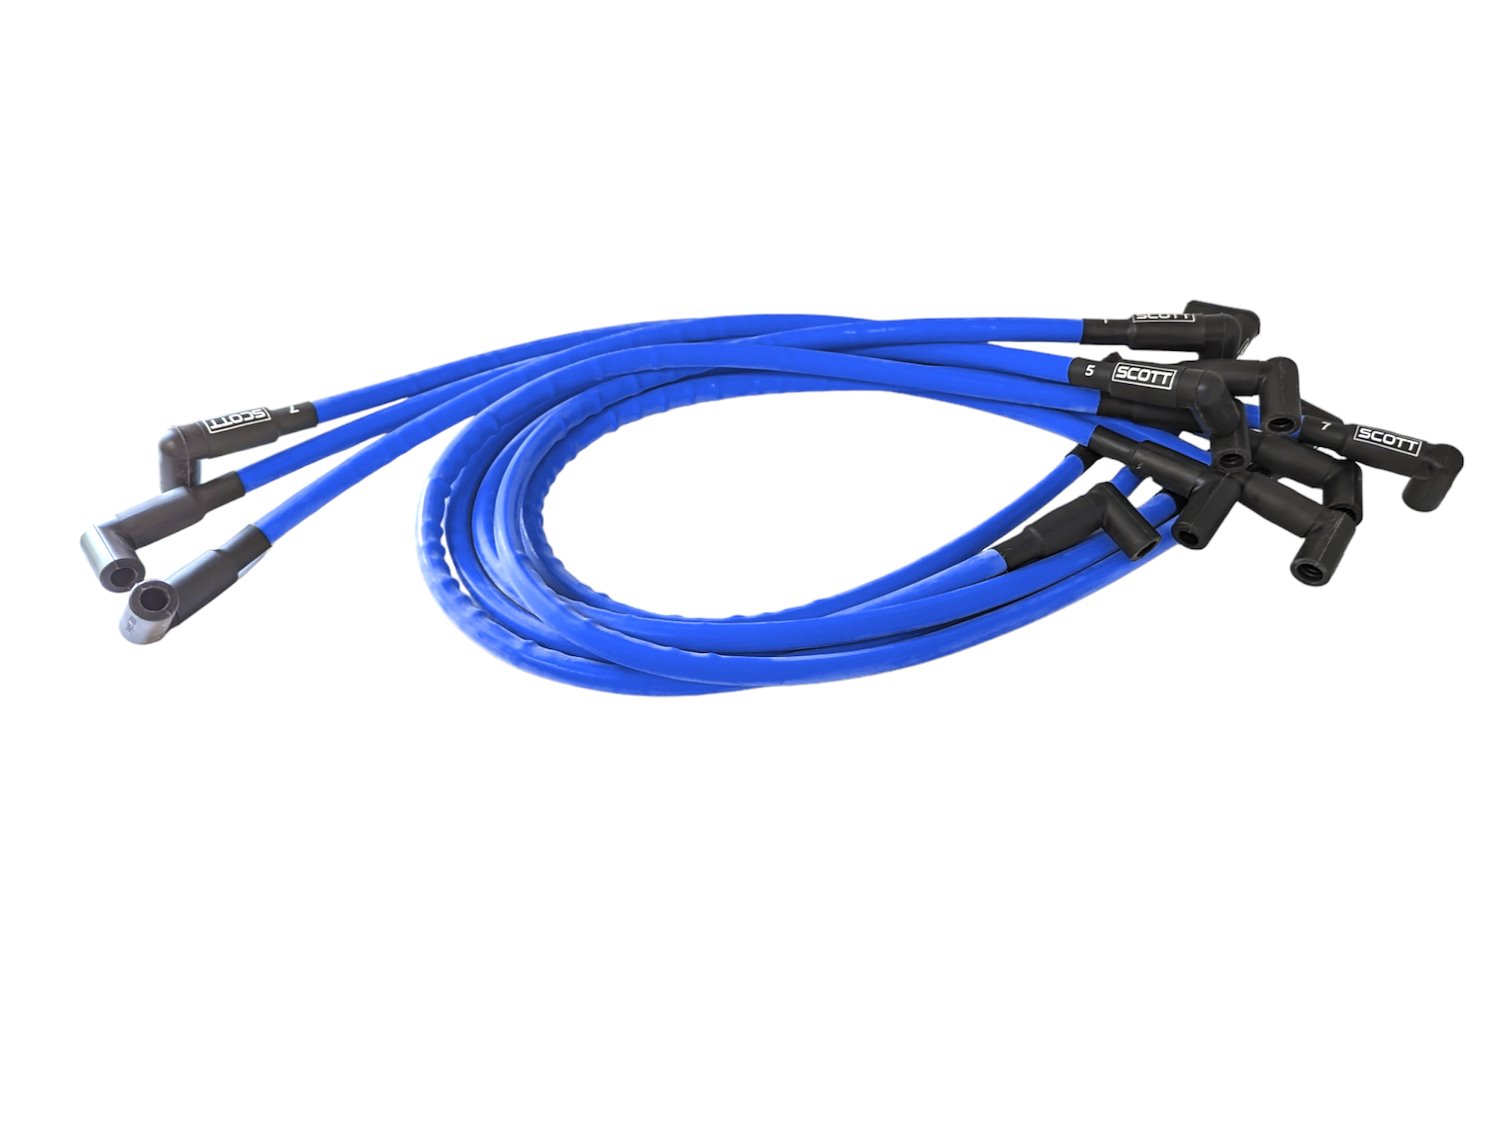 SPW-CH-416-4 High-Performance Silicone-Sleeved Spark Plug Wire Set for Big Block Chevy, Under Header [Blue]